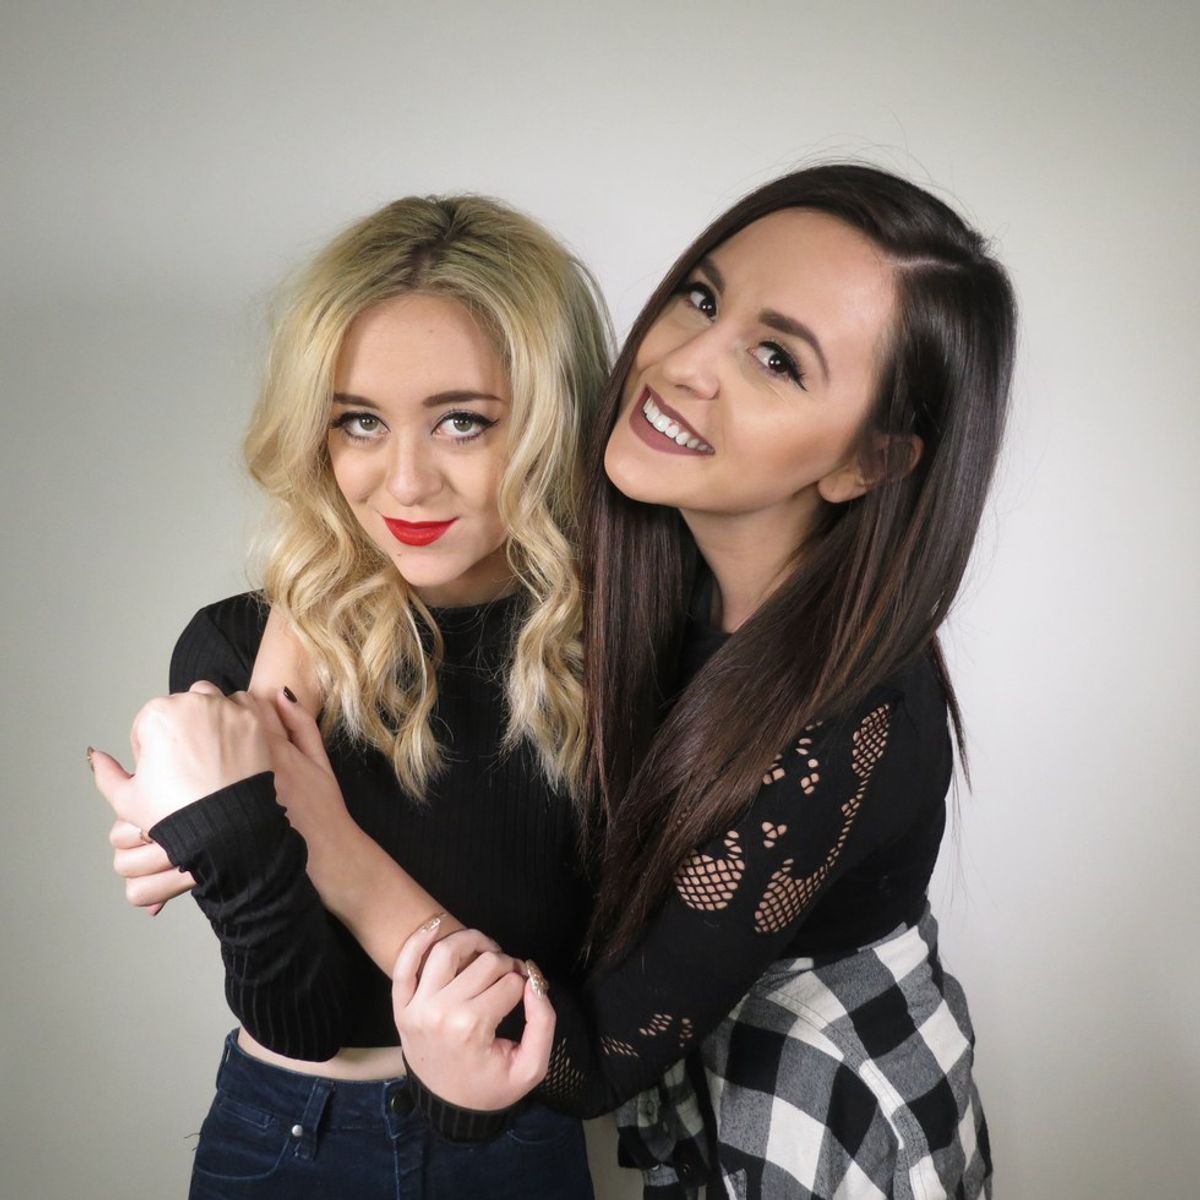 10 Megan And Liz Songs To Check Out Right Now